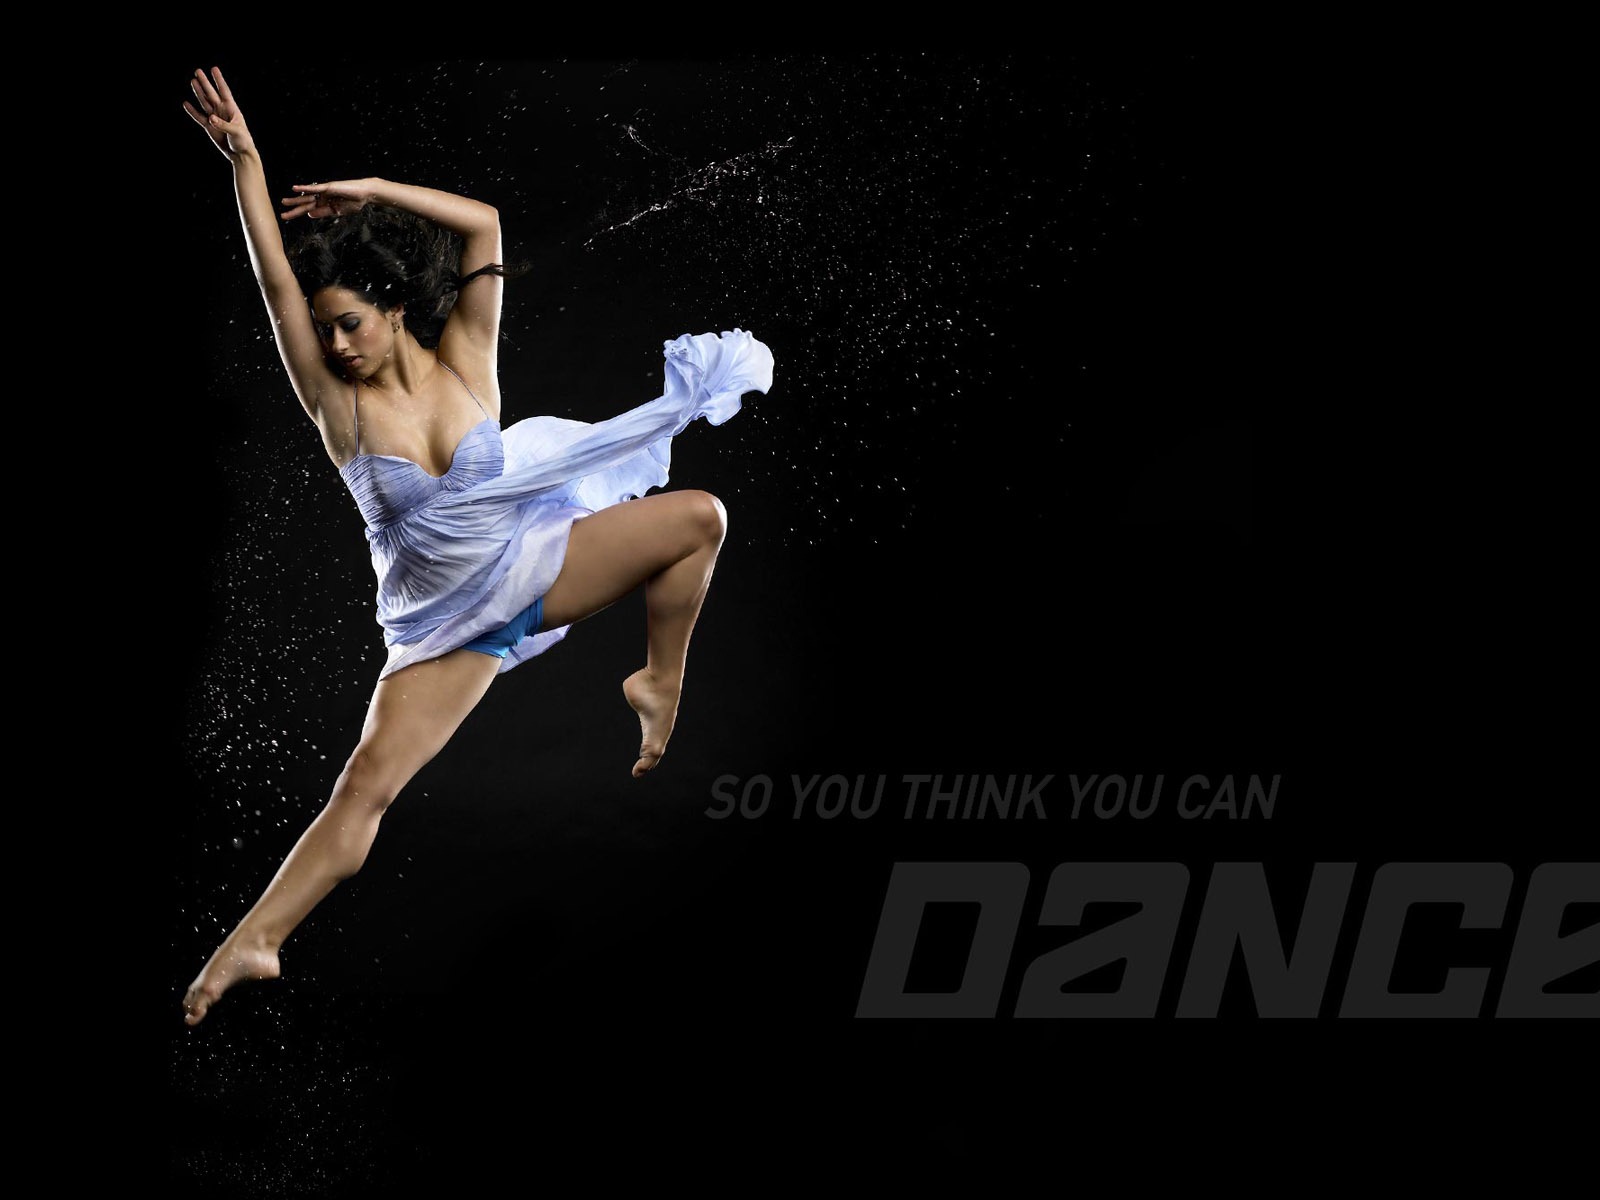 So You Think You Can Dance Wallpaper (1) #3 - 1600x1200